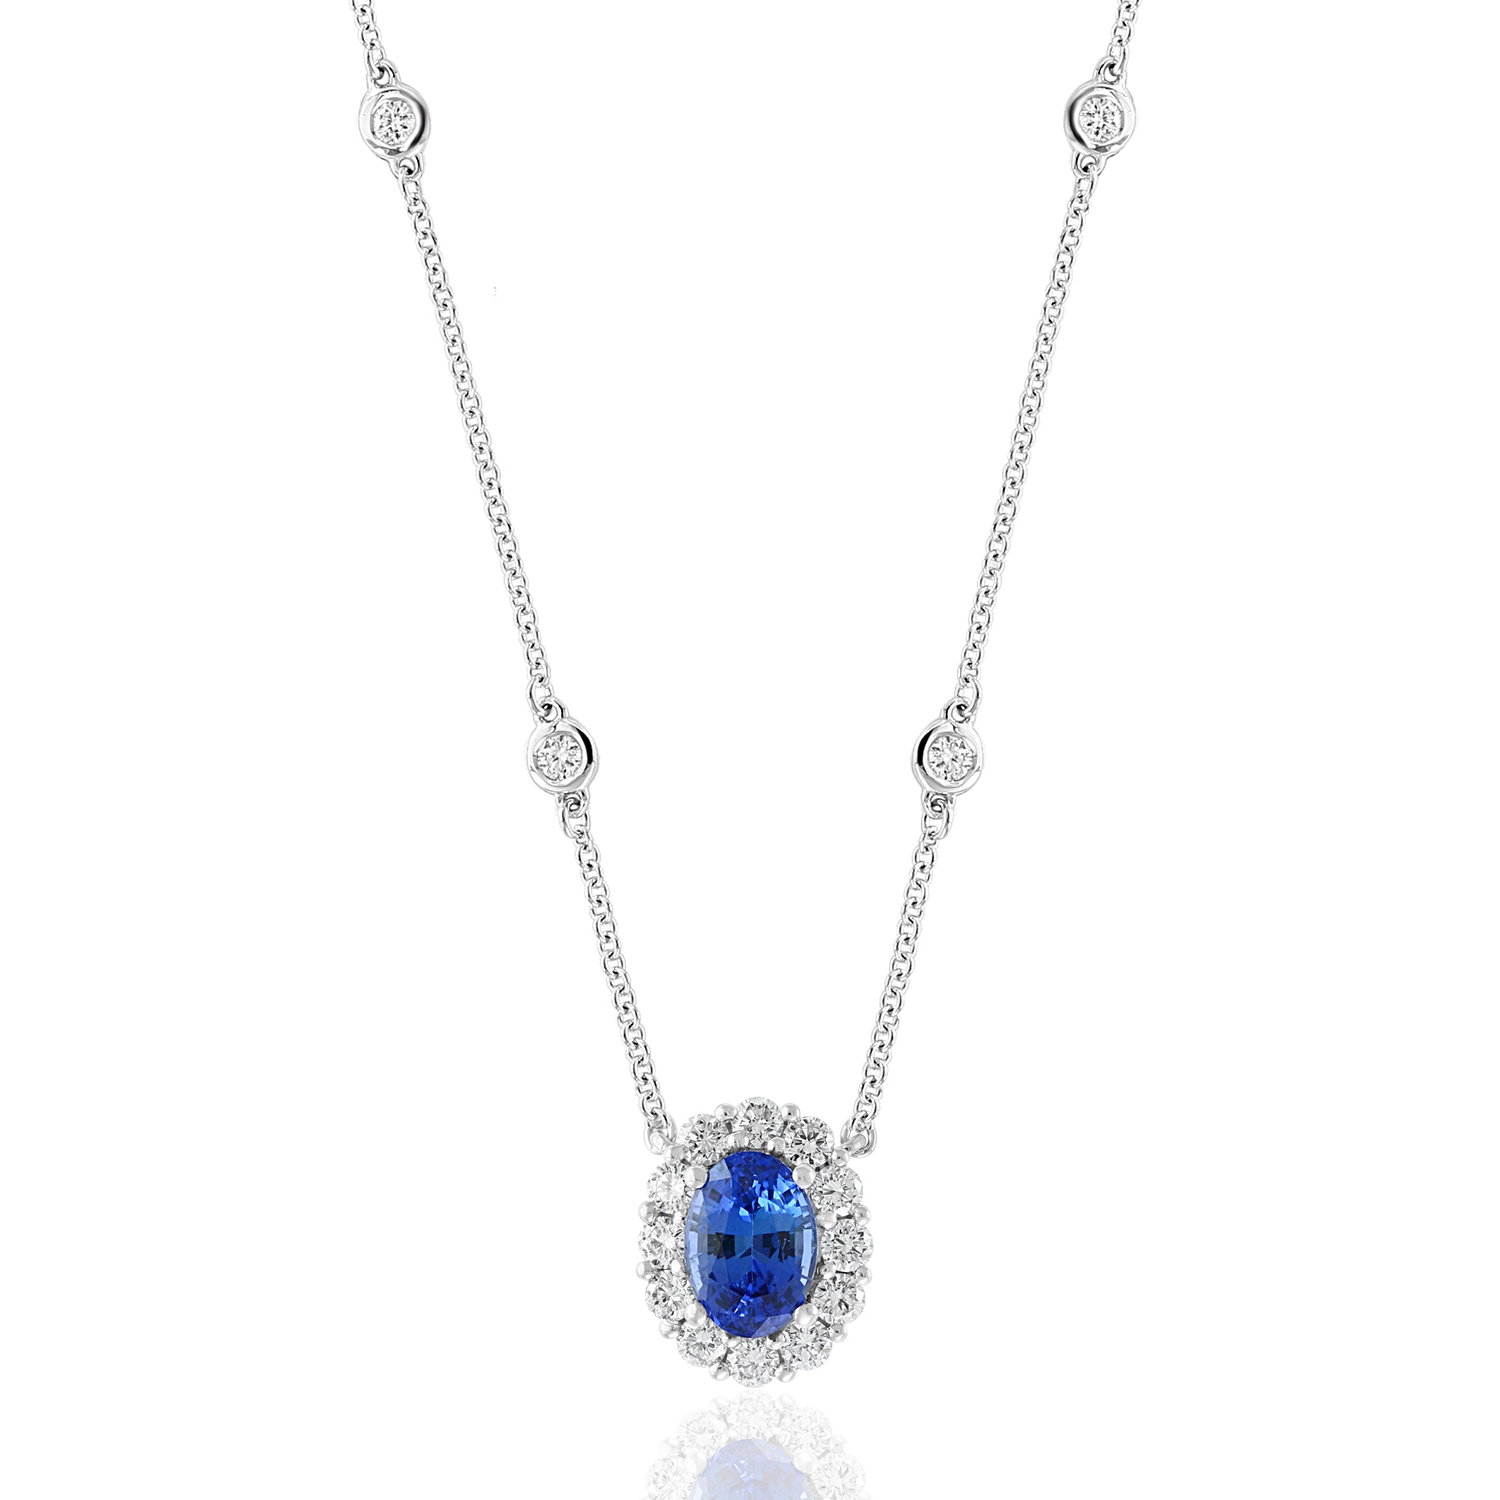 Oval Sapphire Pendant Necklace with Diamond Halo and Diamond Station Chain 0